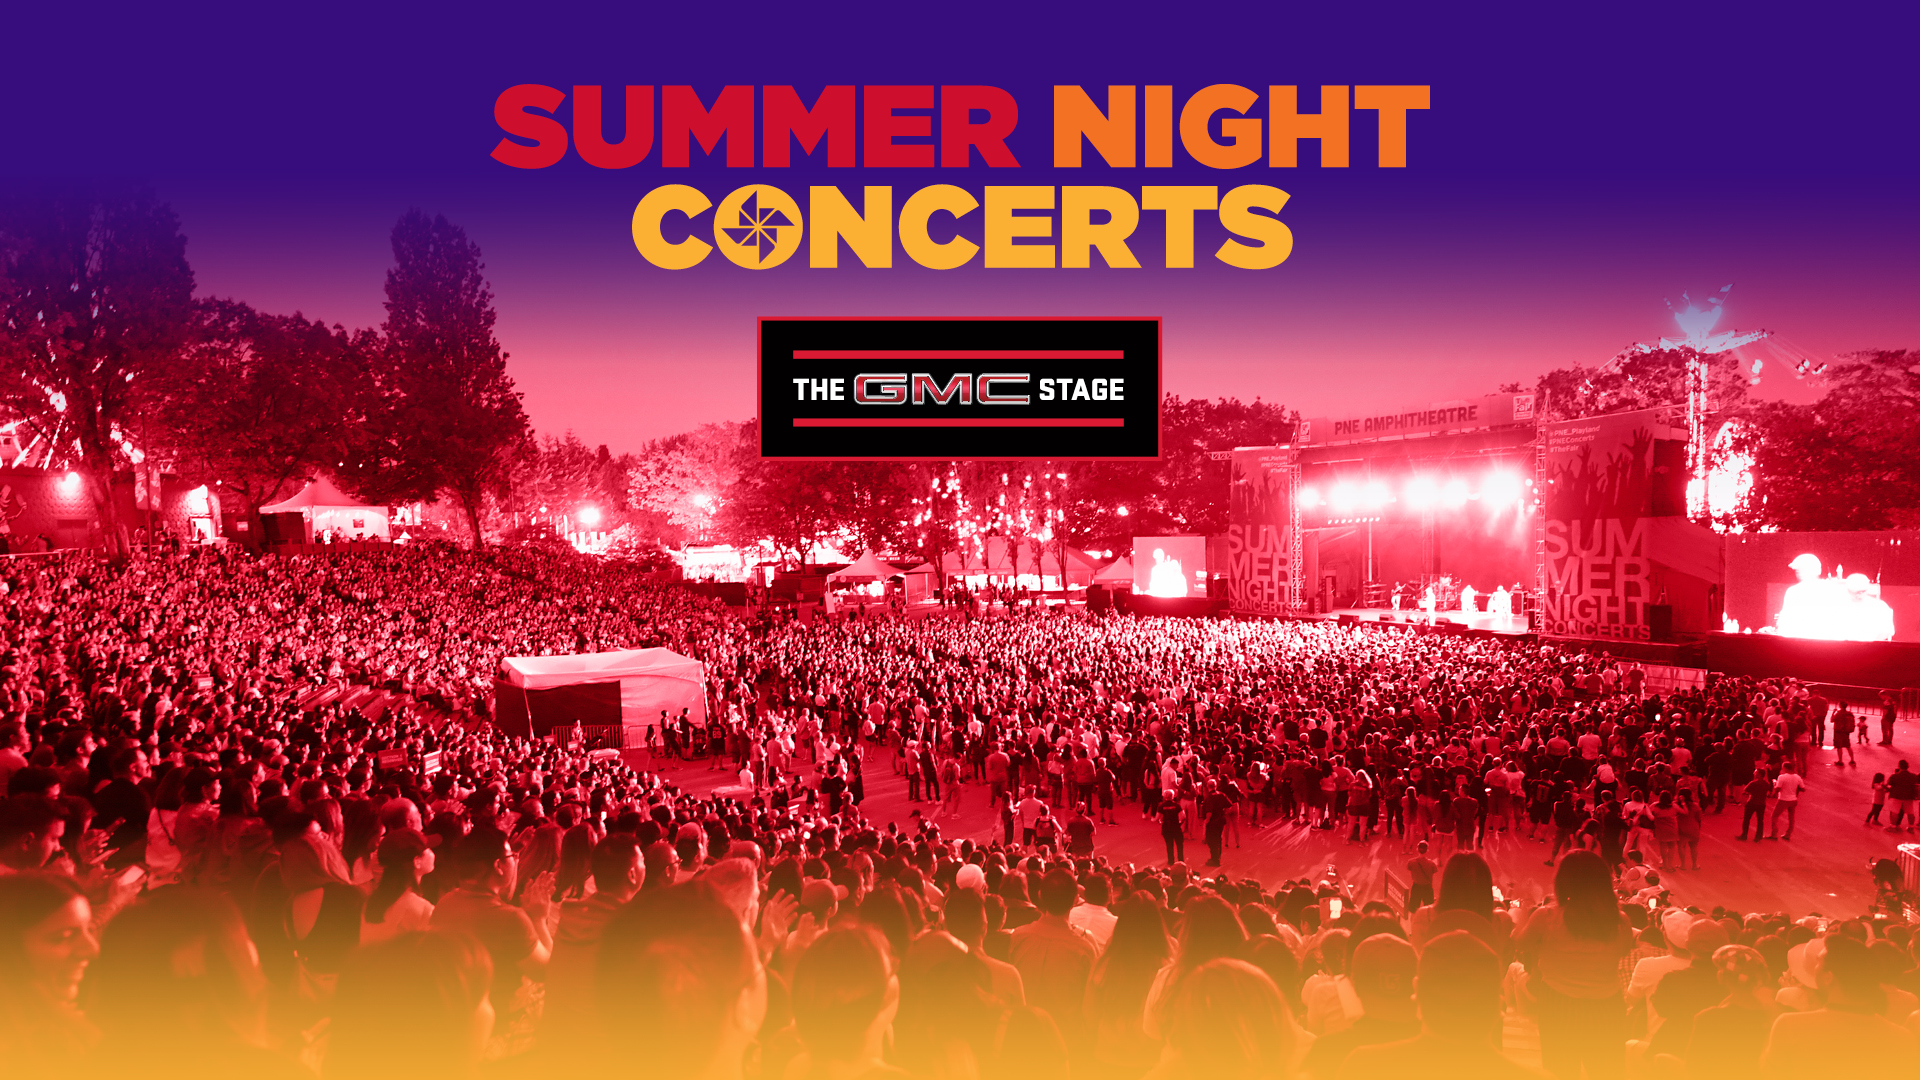 Summer Night Concerts